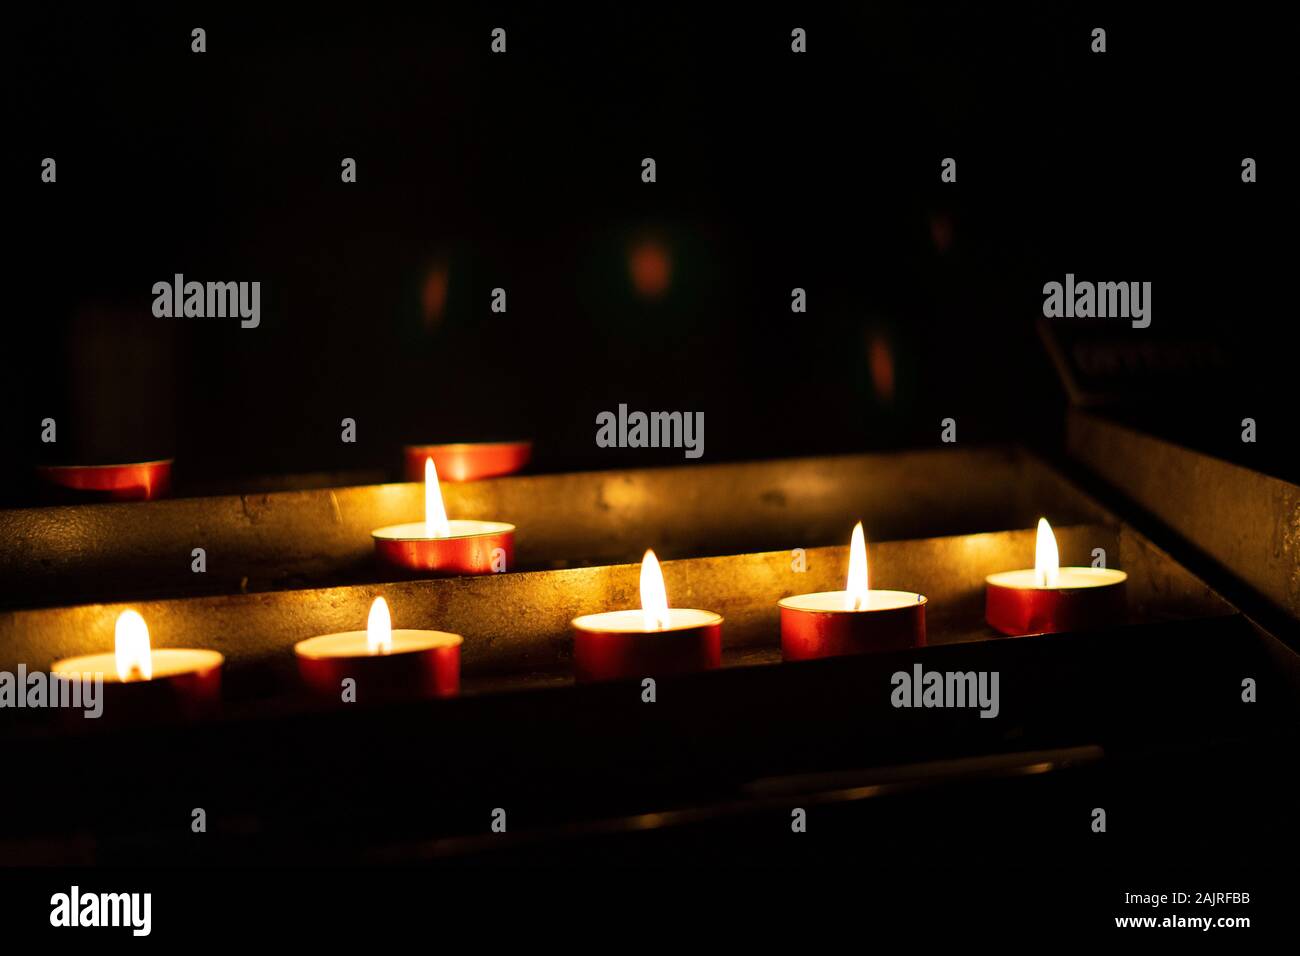 Candles lit red during a session of spiritualism. Concept of occultism, mysticism and black magic. Stock Photo